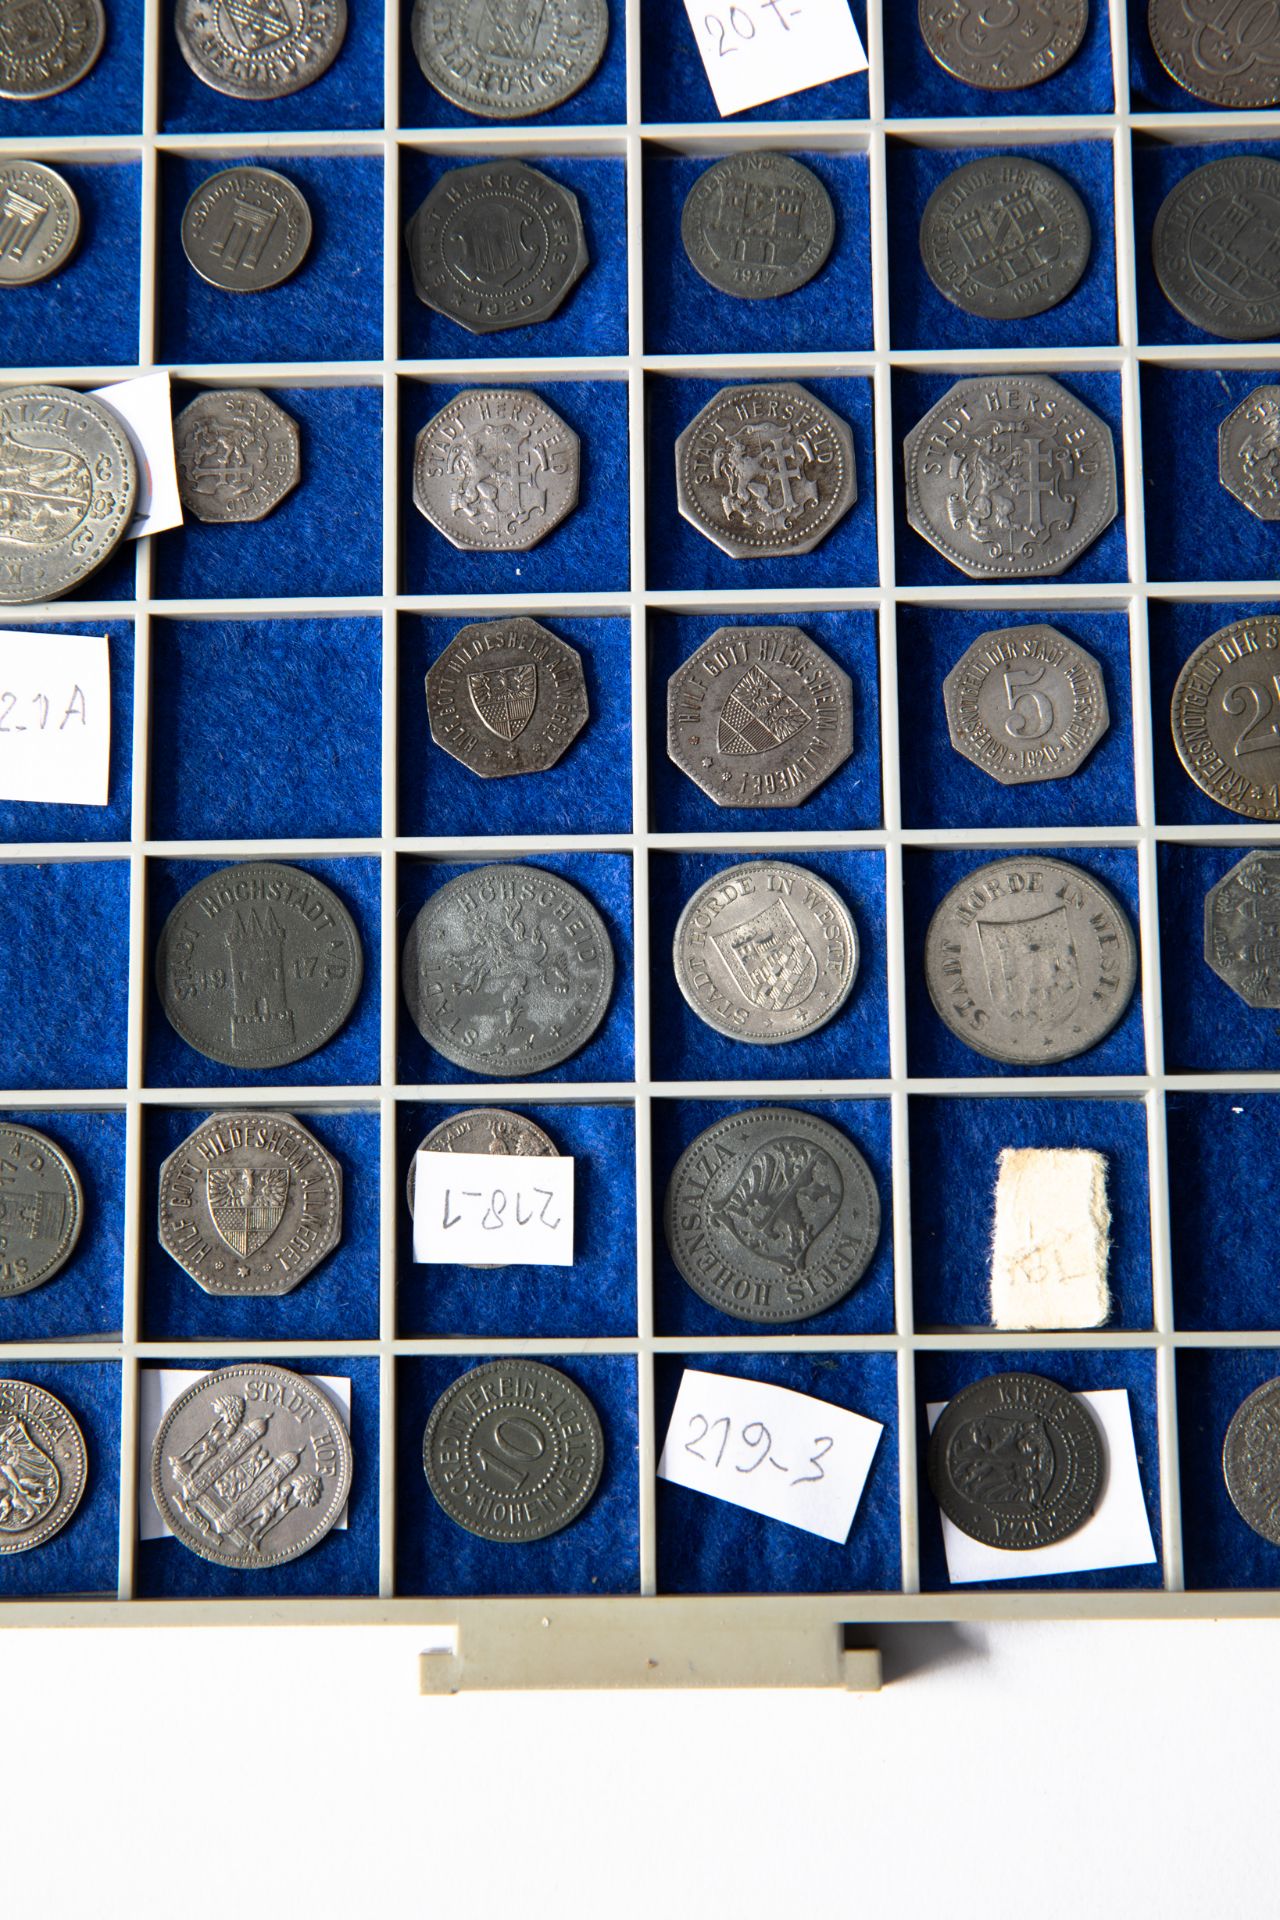 Emergency coins Germany cities from H-L, 245 pieces - Bild 11 aus 22